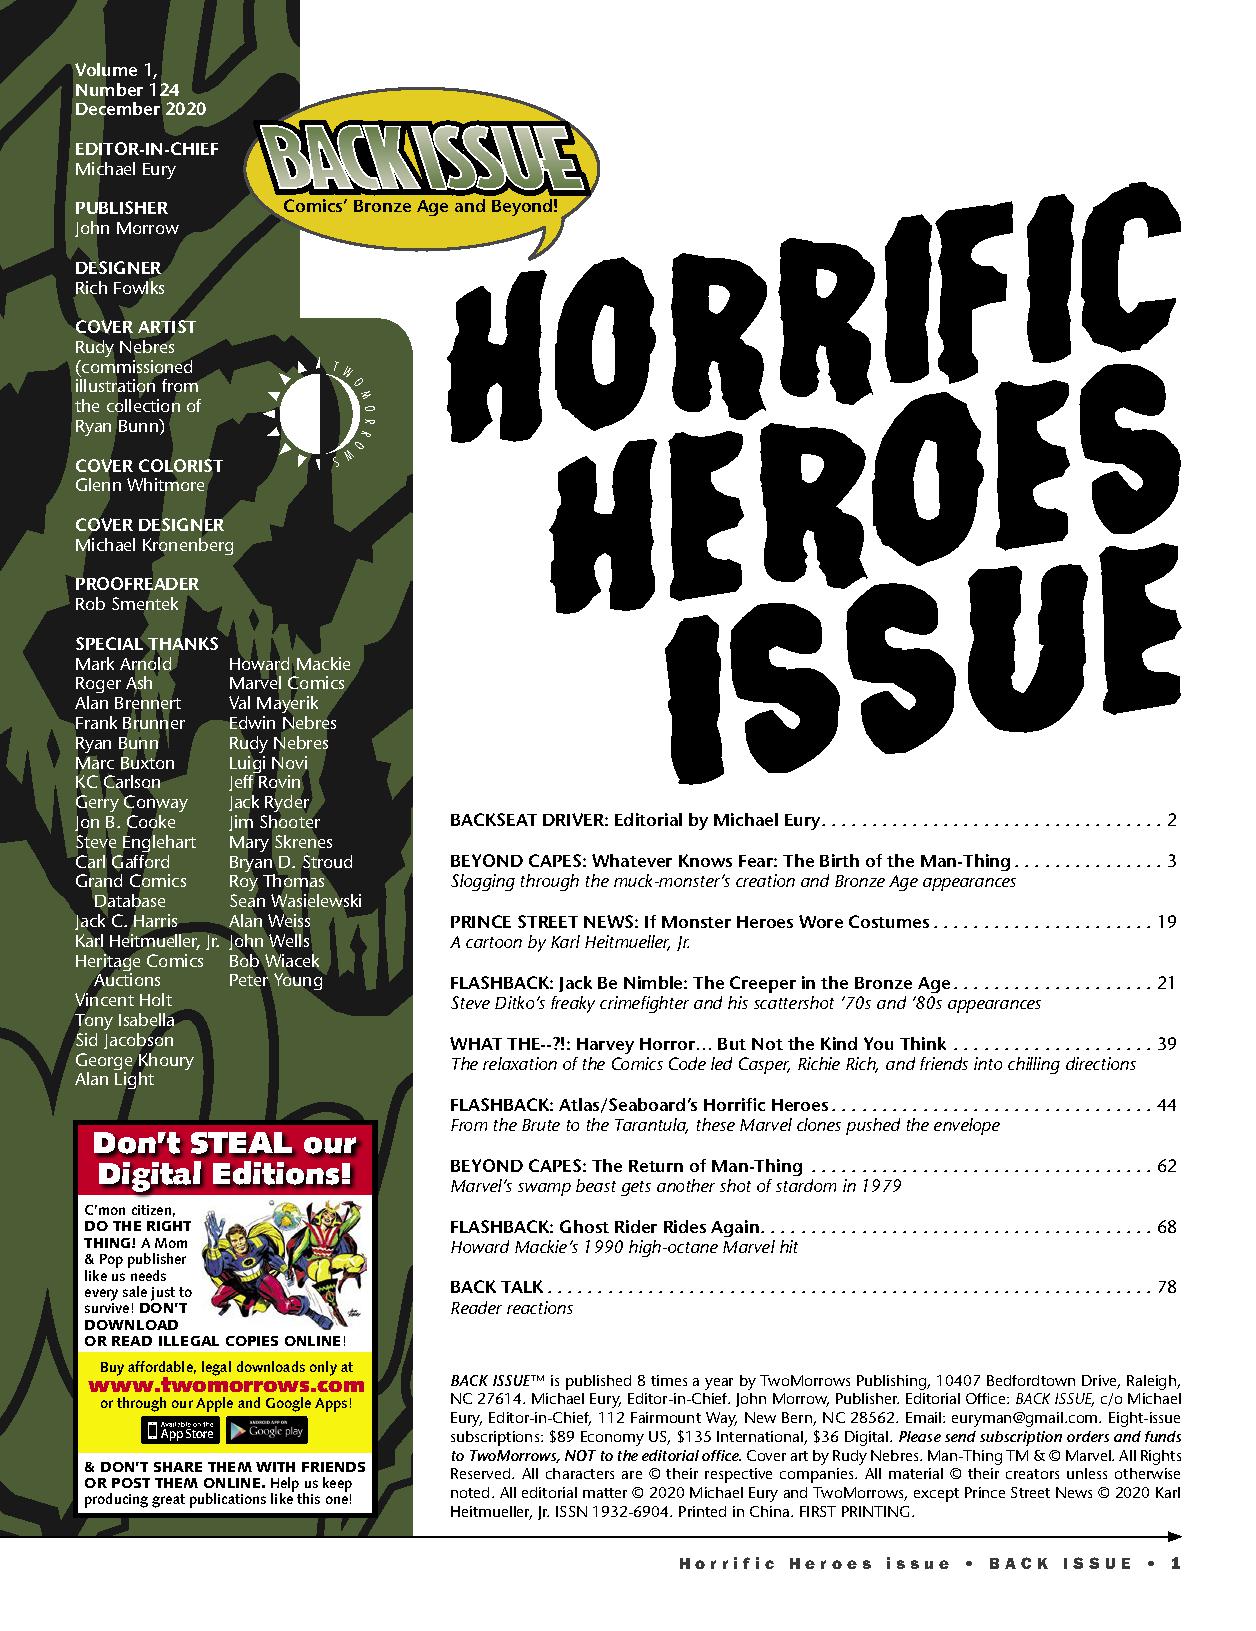 Read online Back Issue comic -  Issue #124 - 3